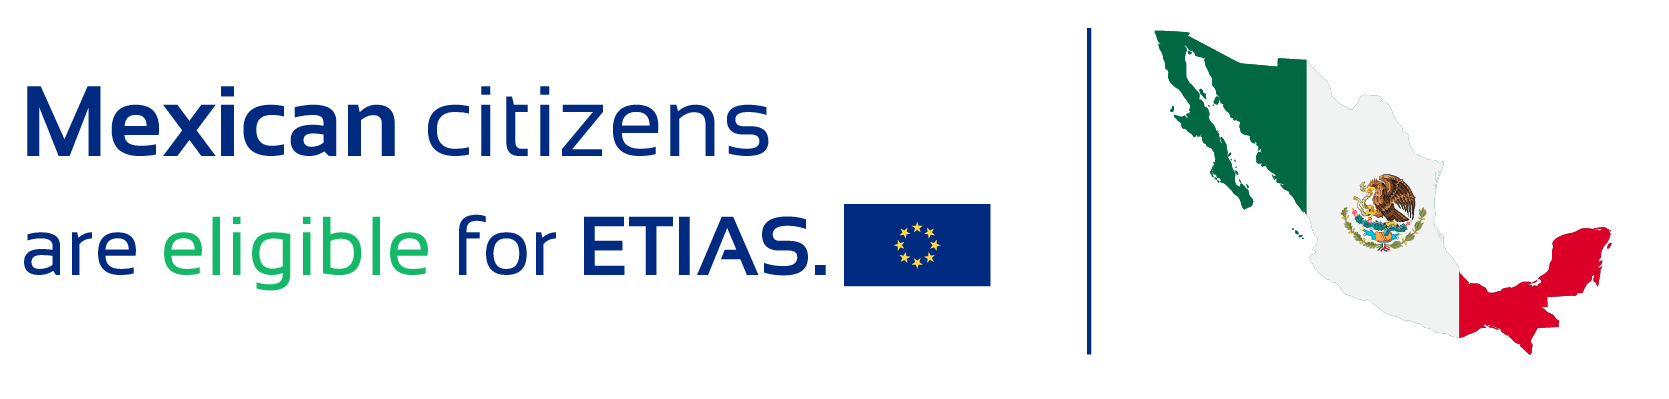 Mexican citizens are eligible for ETIAS